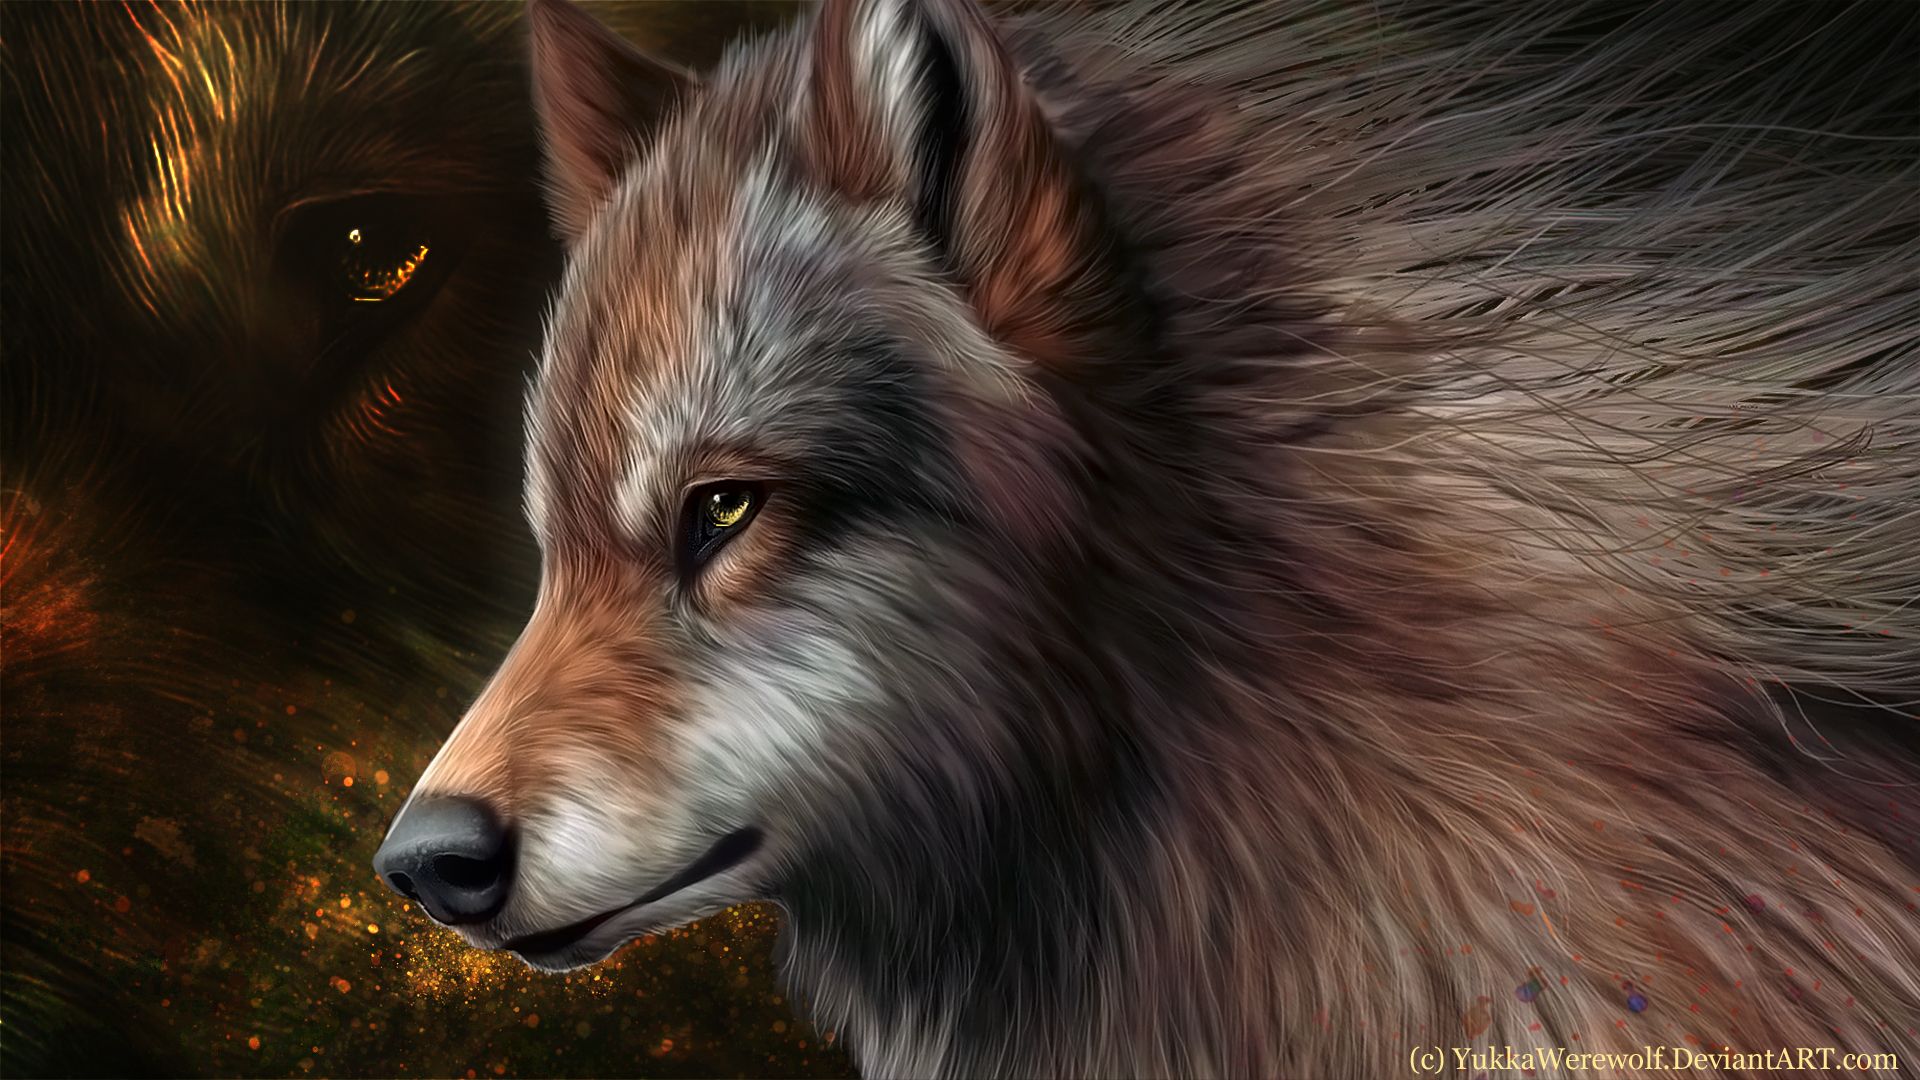 Painted Wolf wallpaper and image, picture, photo